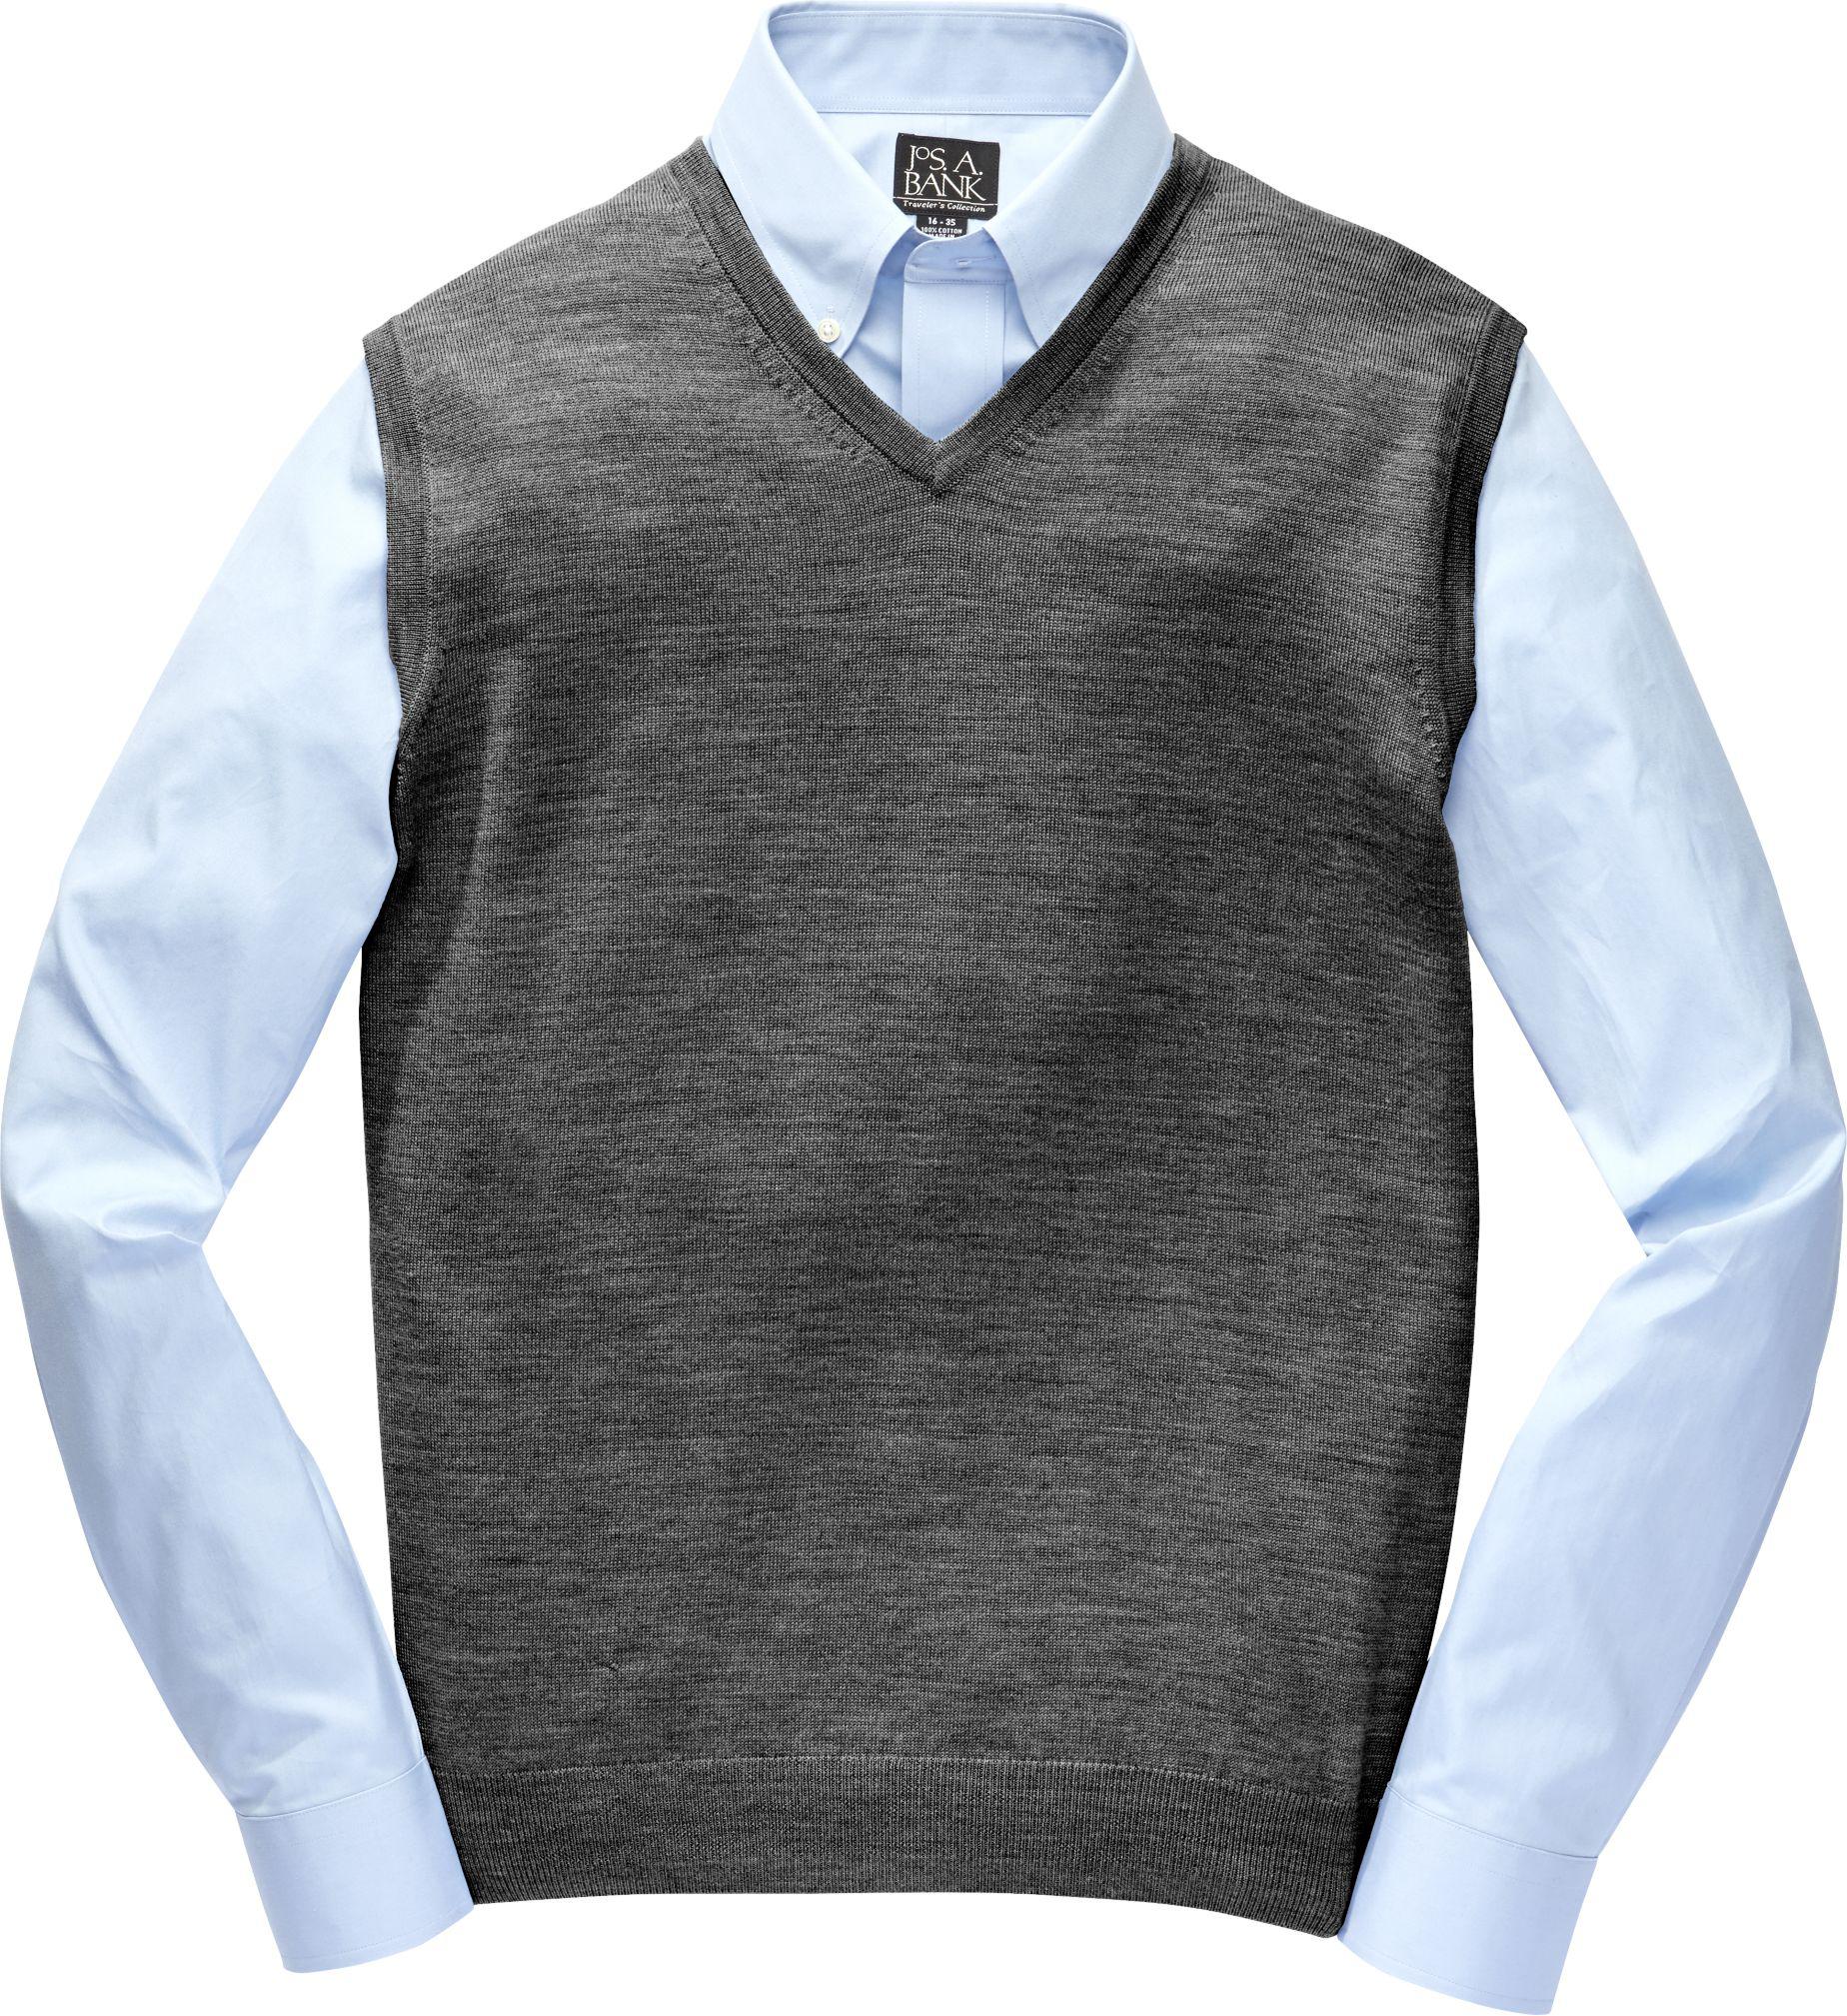 Lyst - Jos. A. Bank Traveler Collection Merino Sweater Vest in Black ...